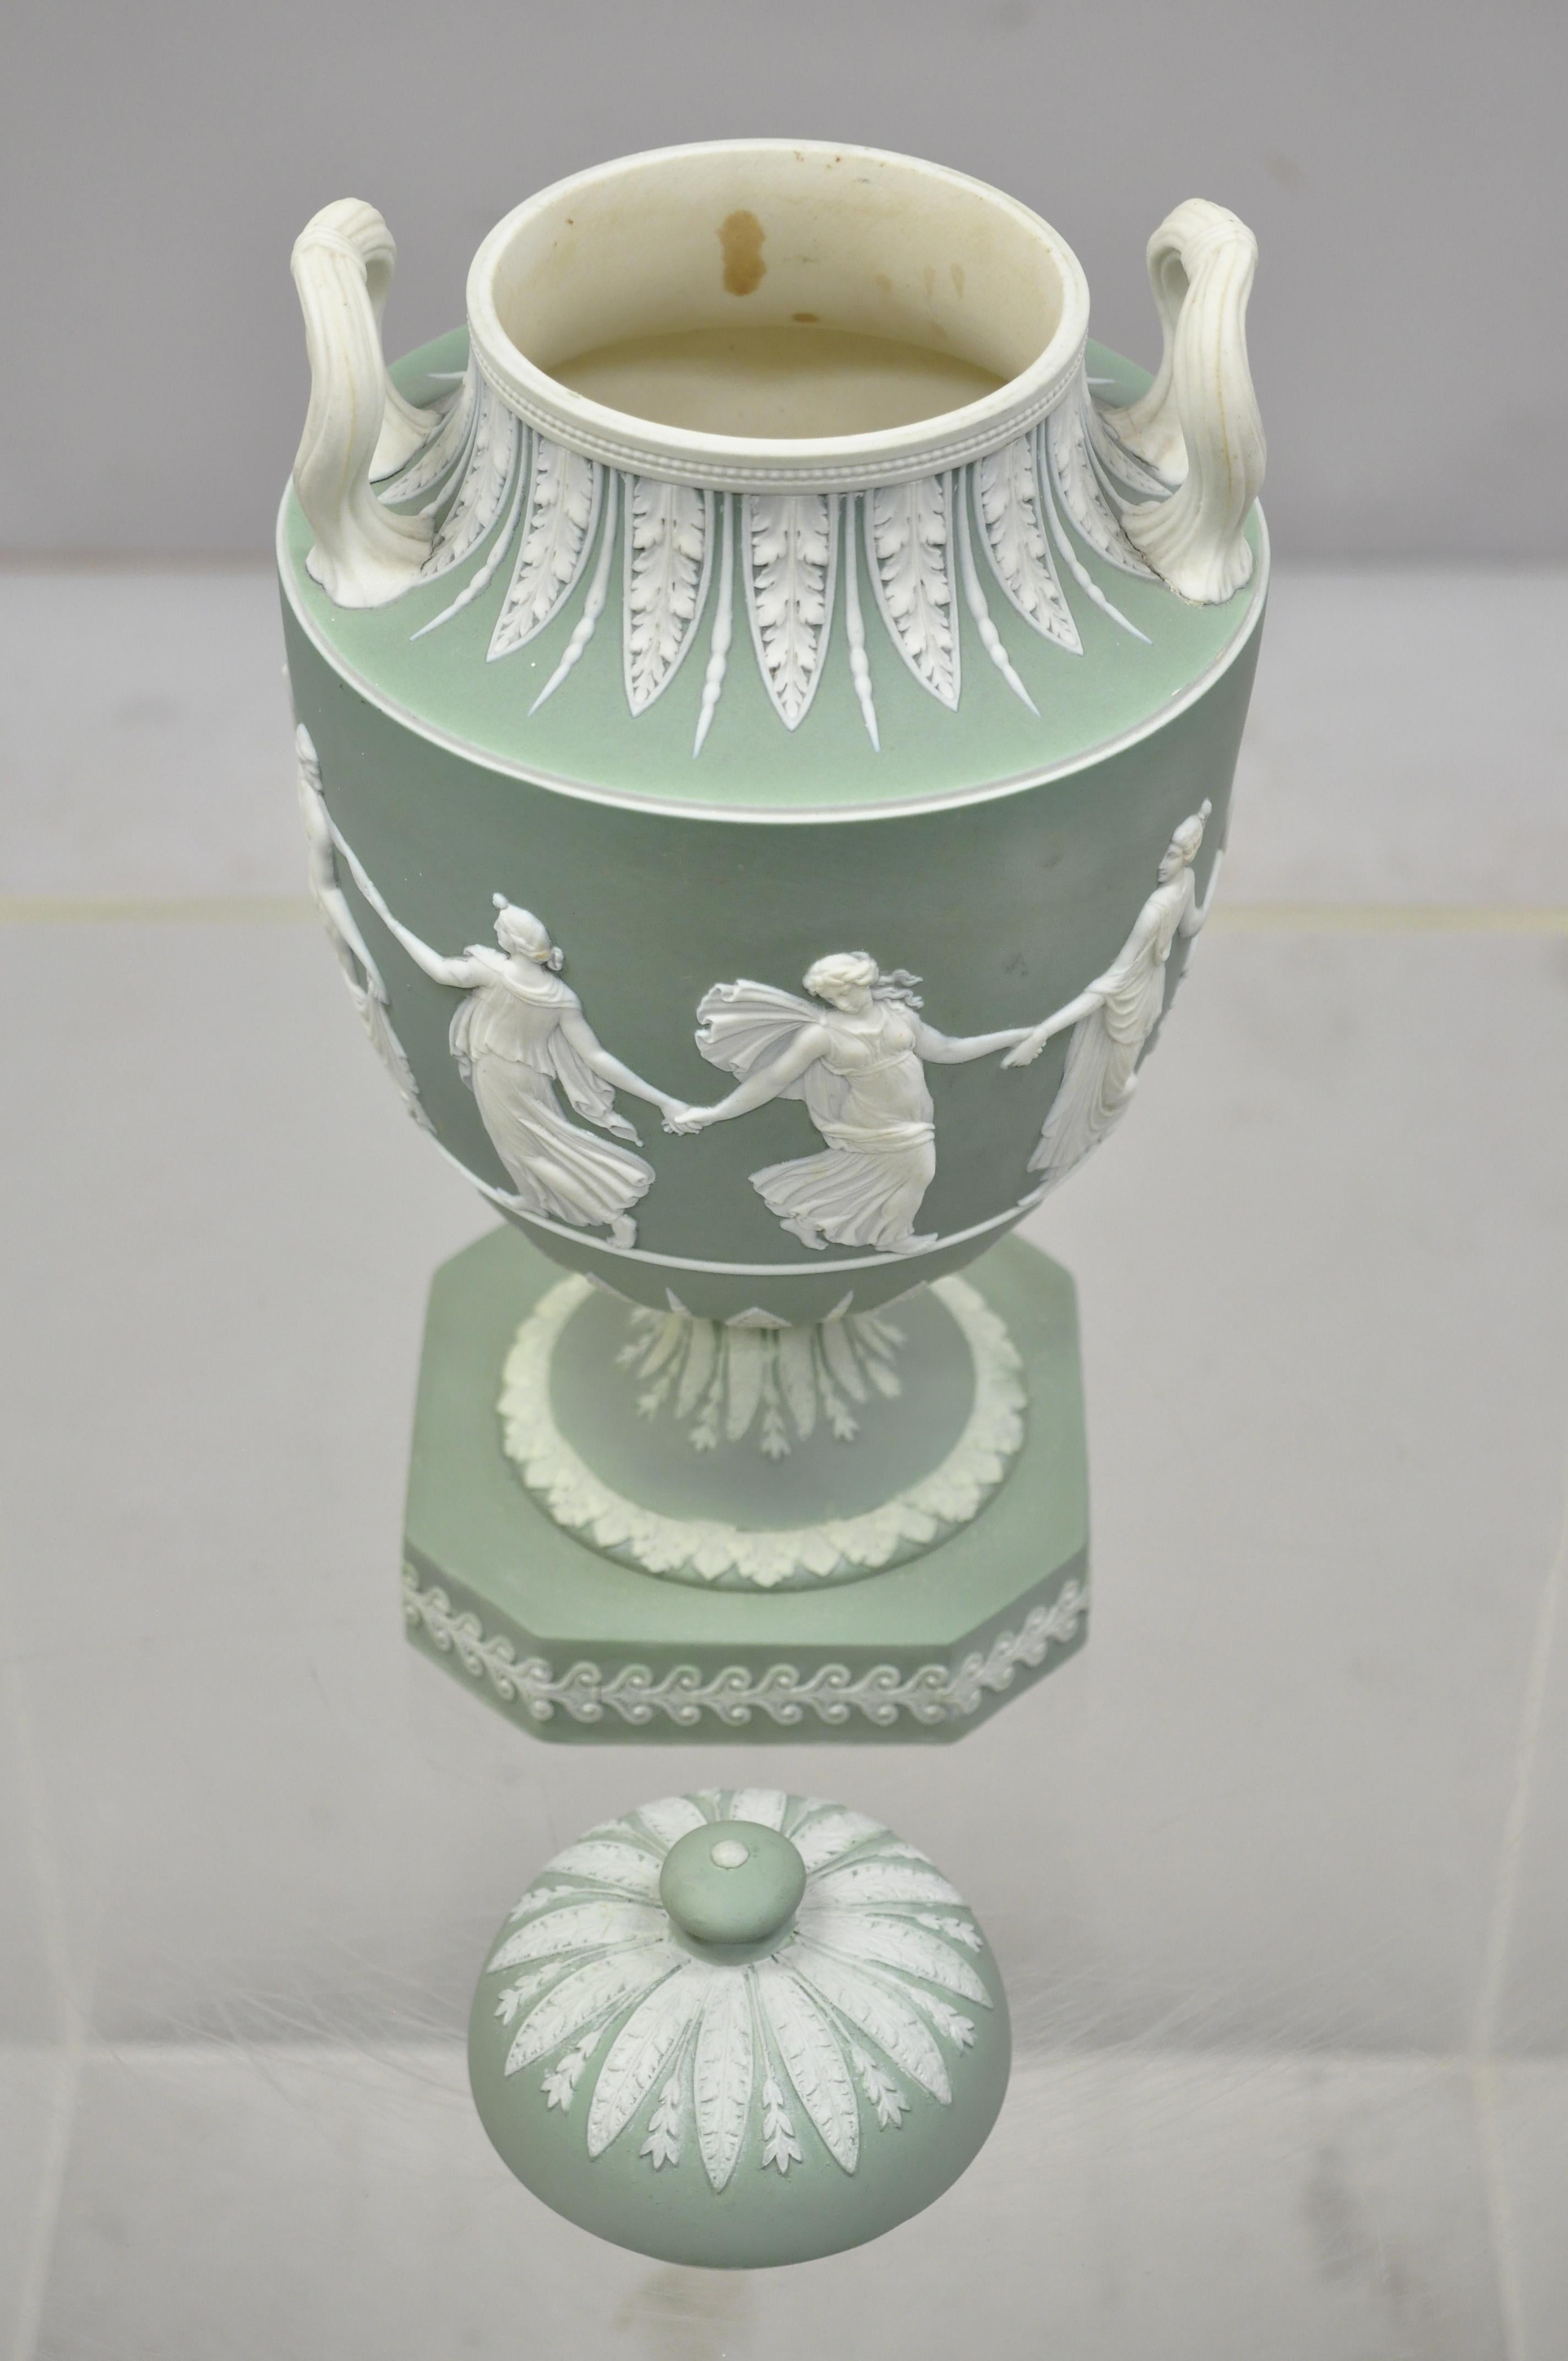 20th Century Wedgwood Sage Green Lidded Double Handle Urn Vase with Dancing Figures